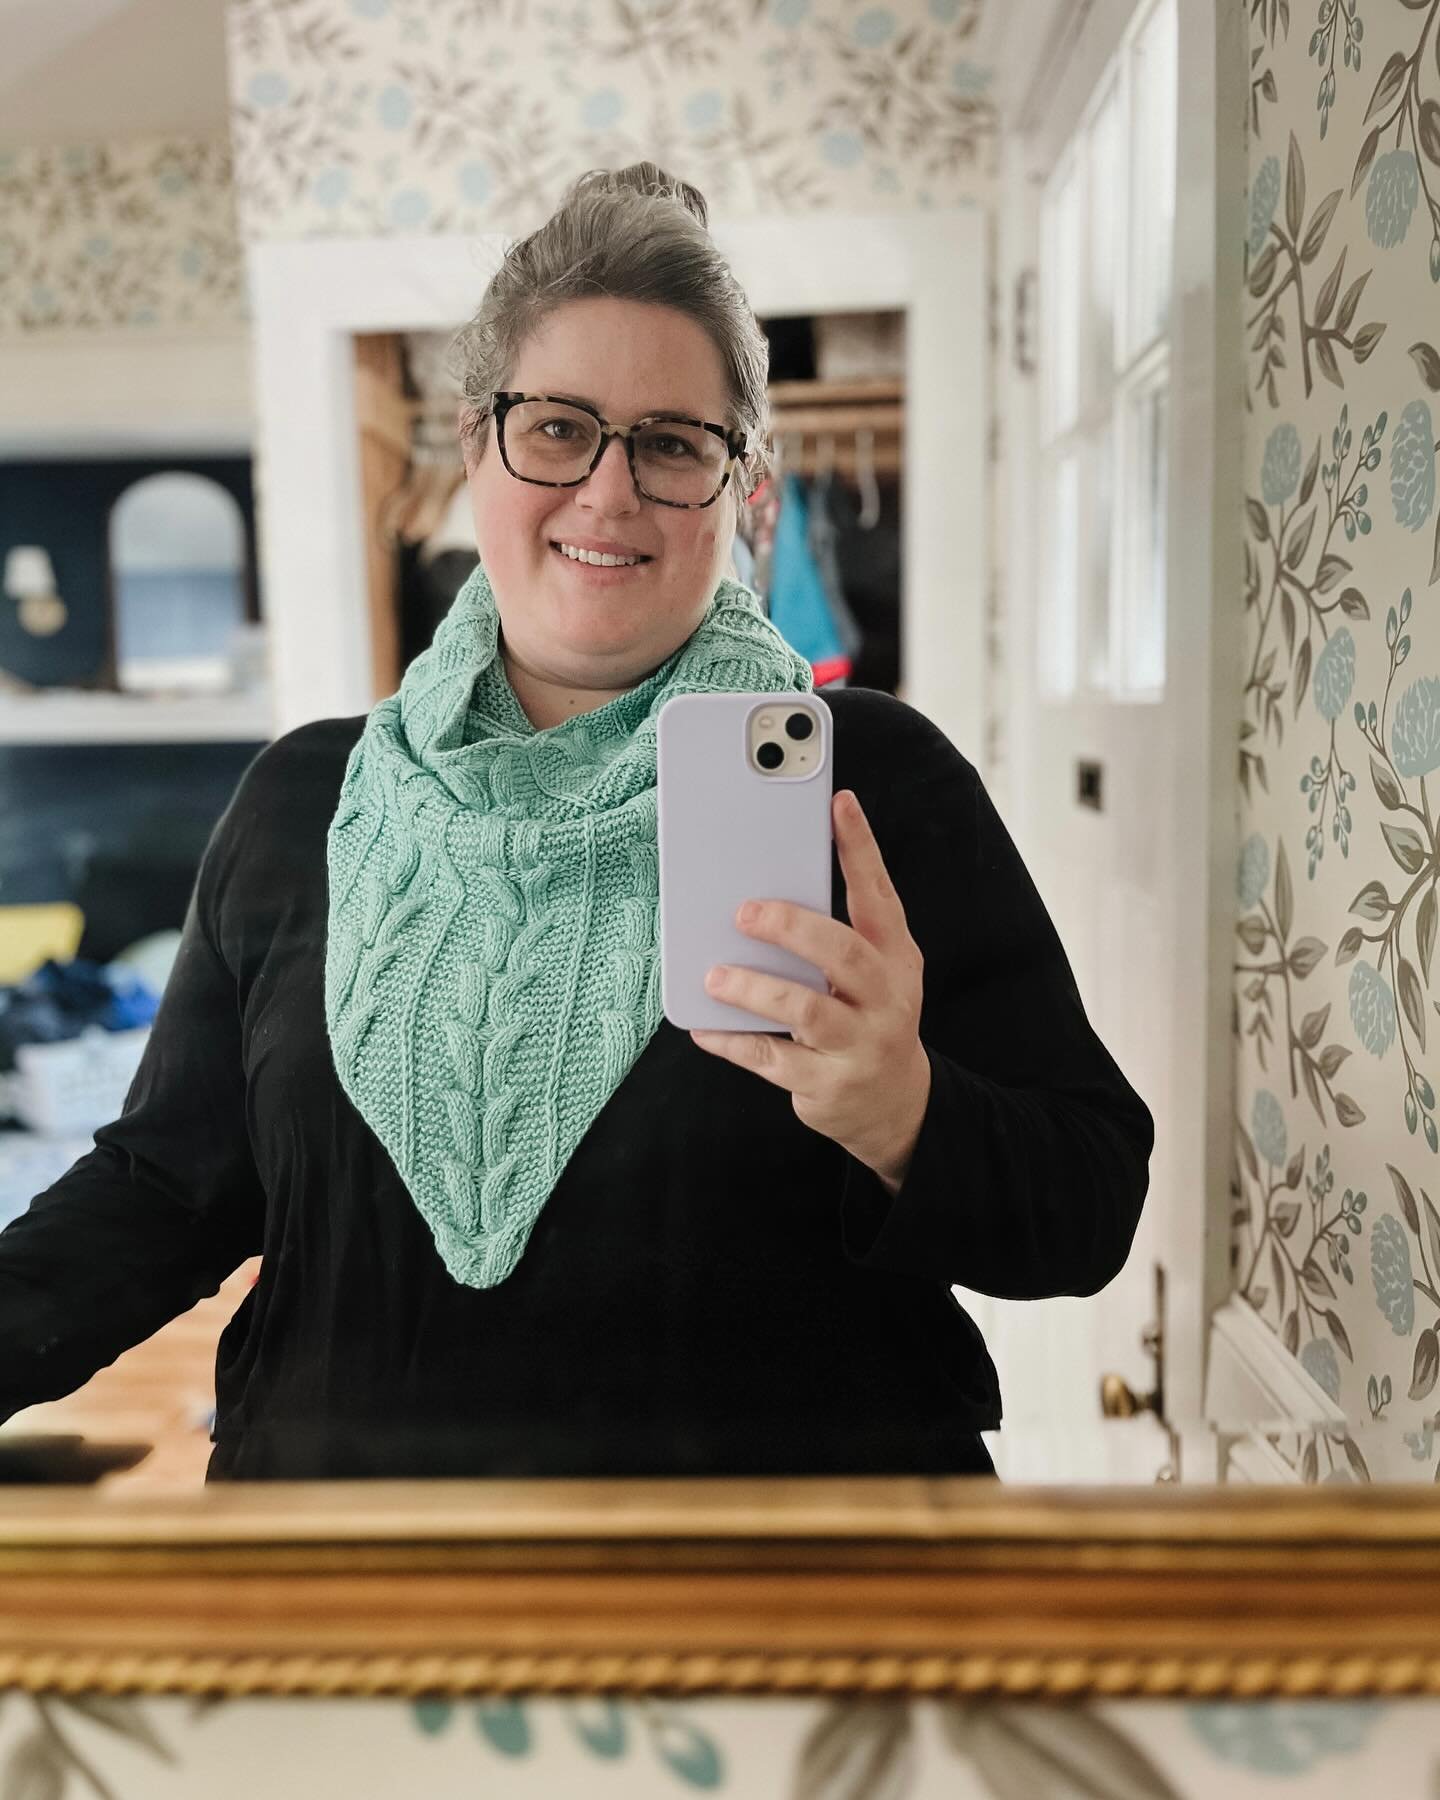 Happy pattern launch day to @beachhouseknits! 🧜🏻&zwj;♀️

I loved getting to test the Merrows Song Cowl for Jill earlier this spring. It&rsquo;s a great project for someone new to cables - I definitely was and it was a great way to practice a new kn